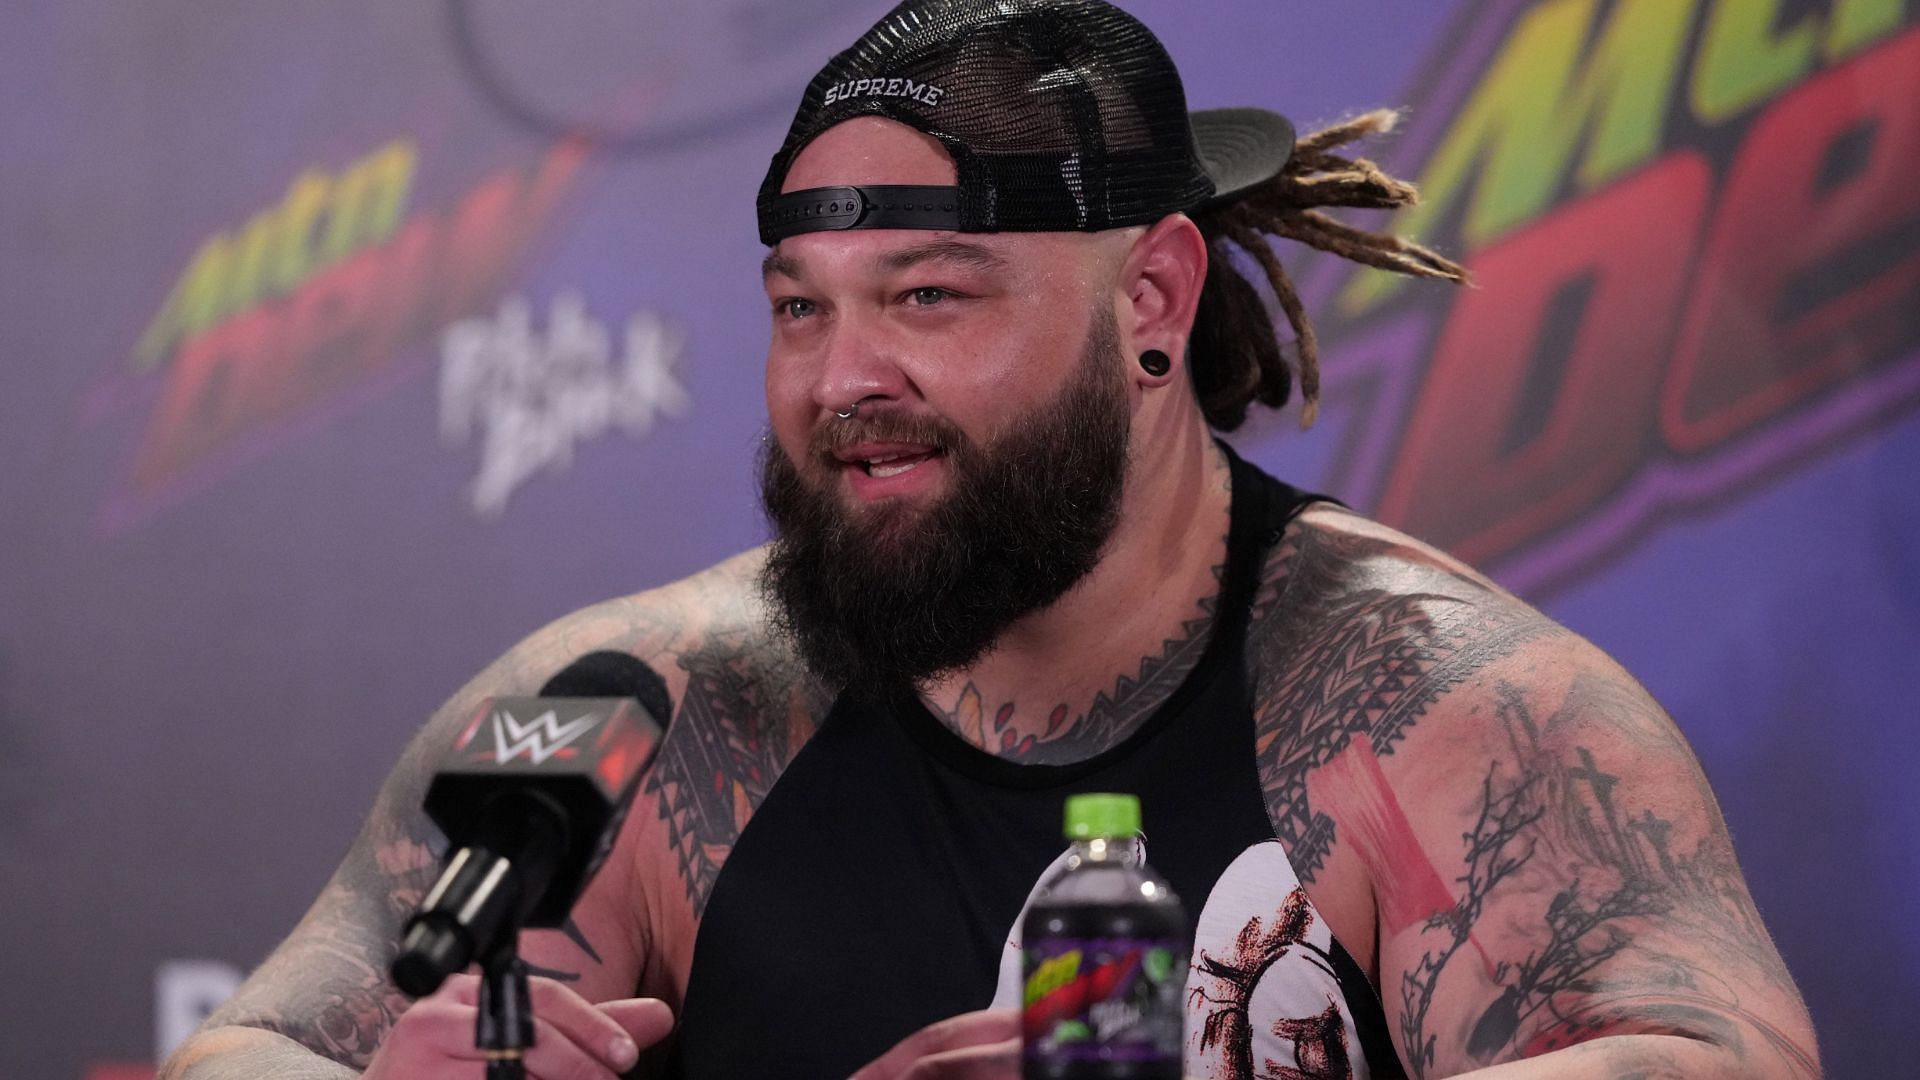 Bray Wyatt reinvented his on-screen character many times in WWE.